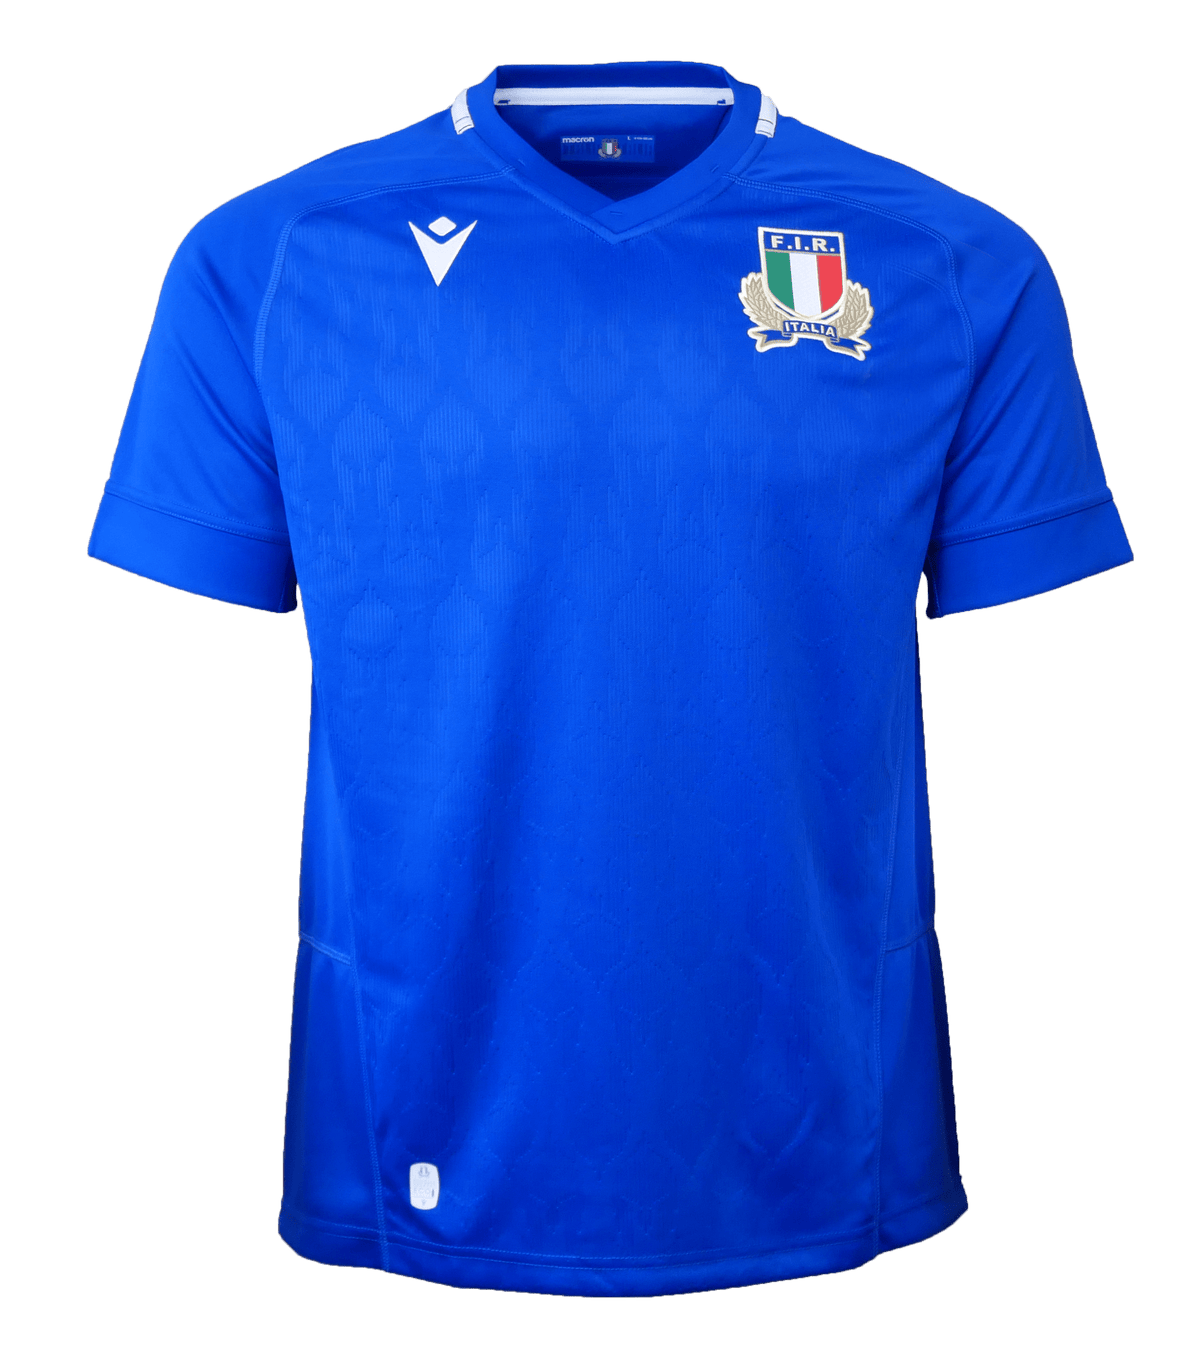 Italy FIR Home Rugby Jersey 22/23 by Macron - World Rugby Shop